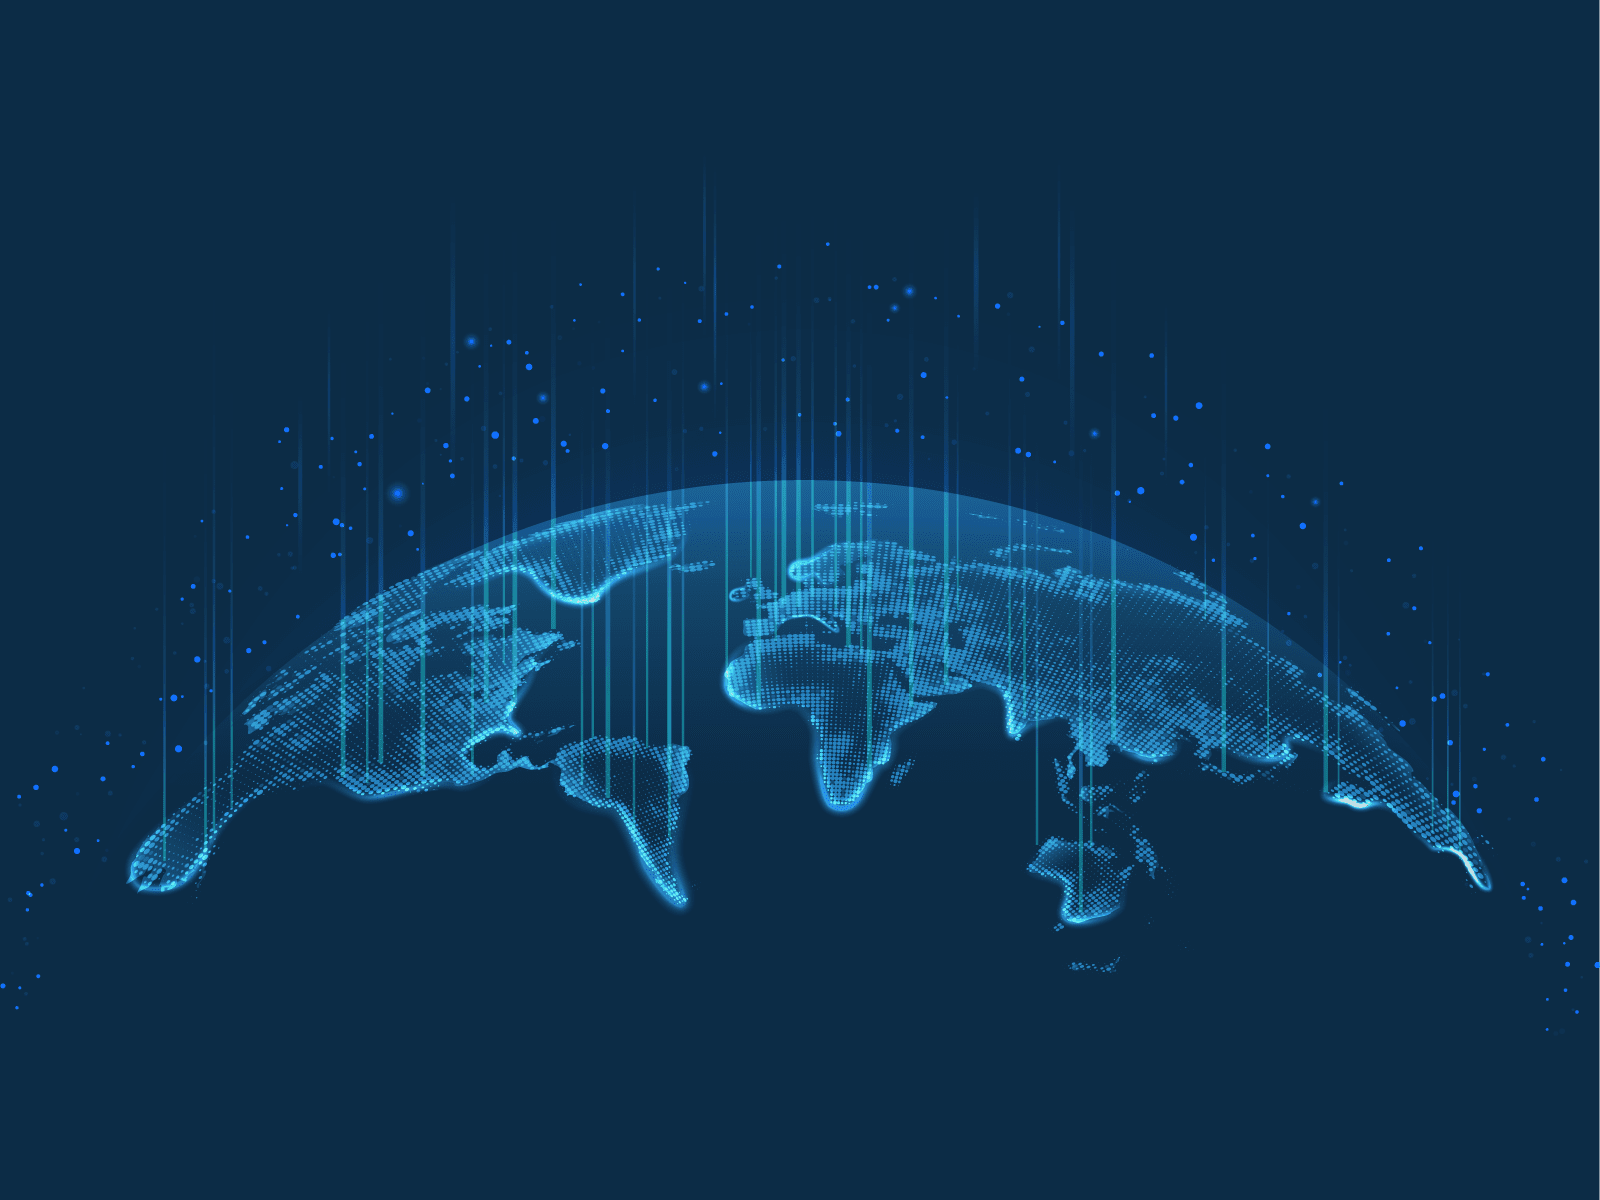 This art shows a digital-emphasis portion of the globe with the contents outlined in bright blue--all on a dark blue background. It suggests global high-tech and networking. The art is shared on the website of AML Partners. AML Partners designs RegTech platform software, AML software, KYC software, and more AML Compliance solutions and GRC tools.